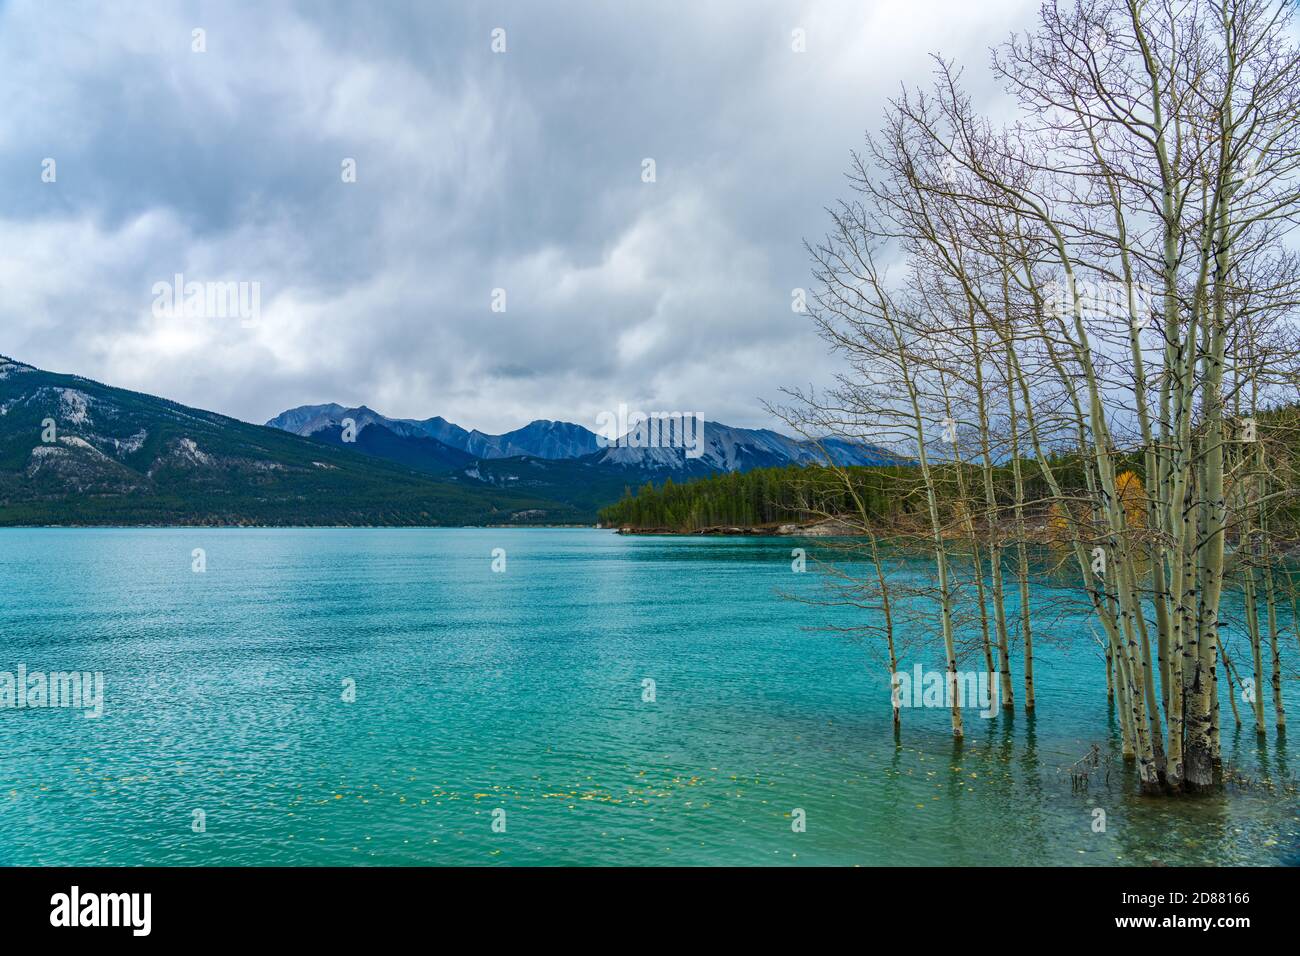 Dried Birch Branches and fallen golden foliage on the emerald green water surface. Scenery view at Abraham lake shore in autumn season. Jasper. Stock Photo